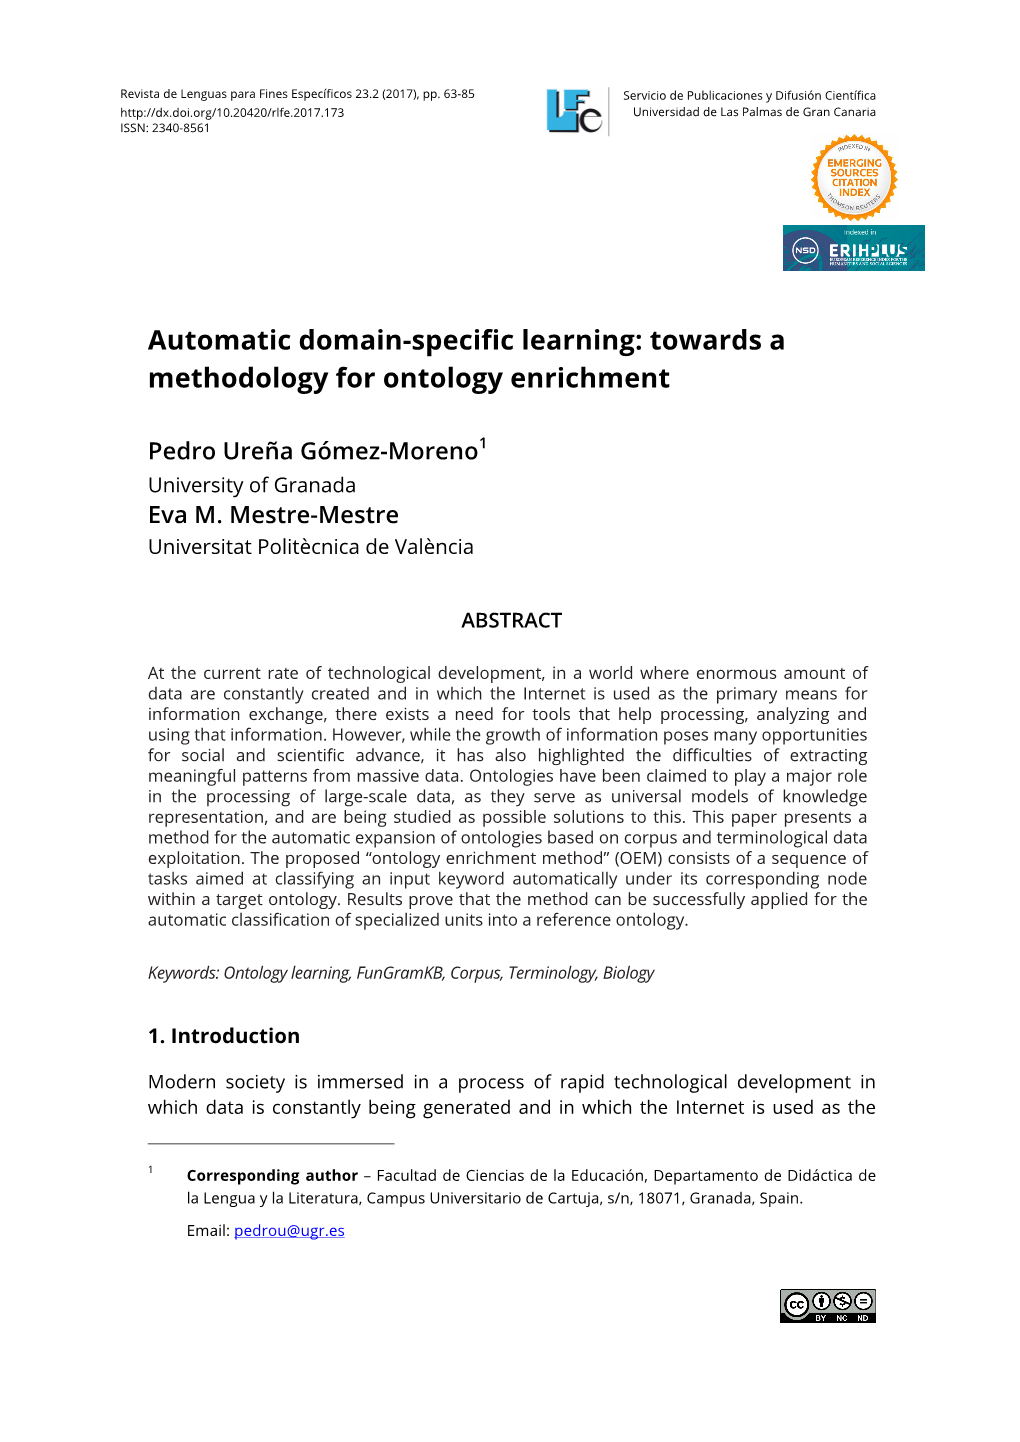 Automatic Domain-Specific Learning: Towards a Methodology for Ontology Enrichment